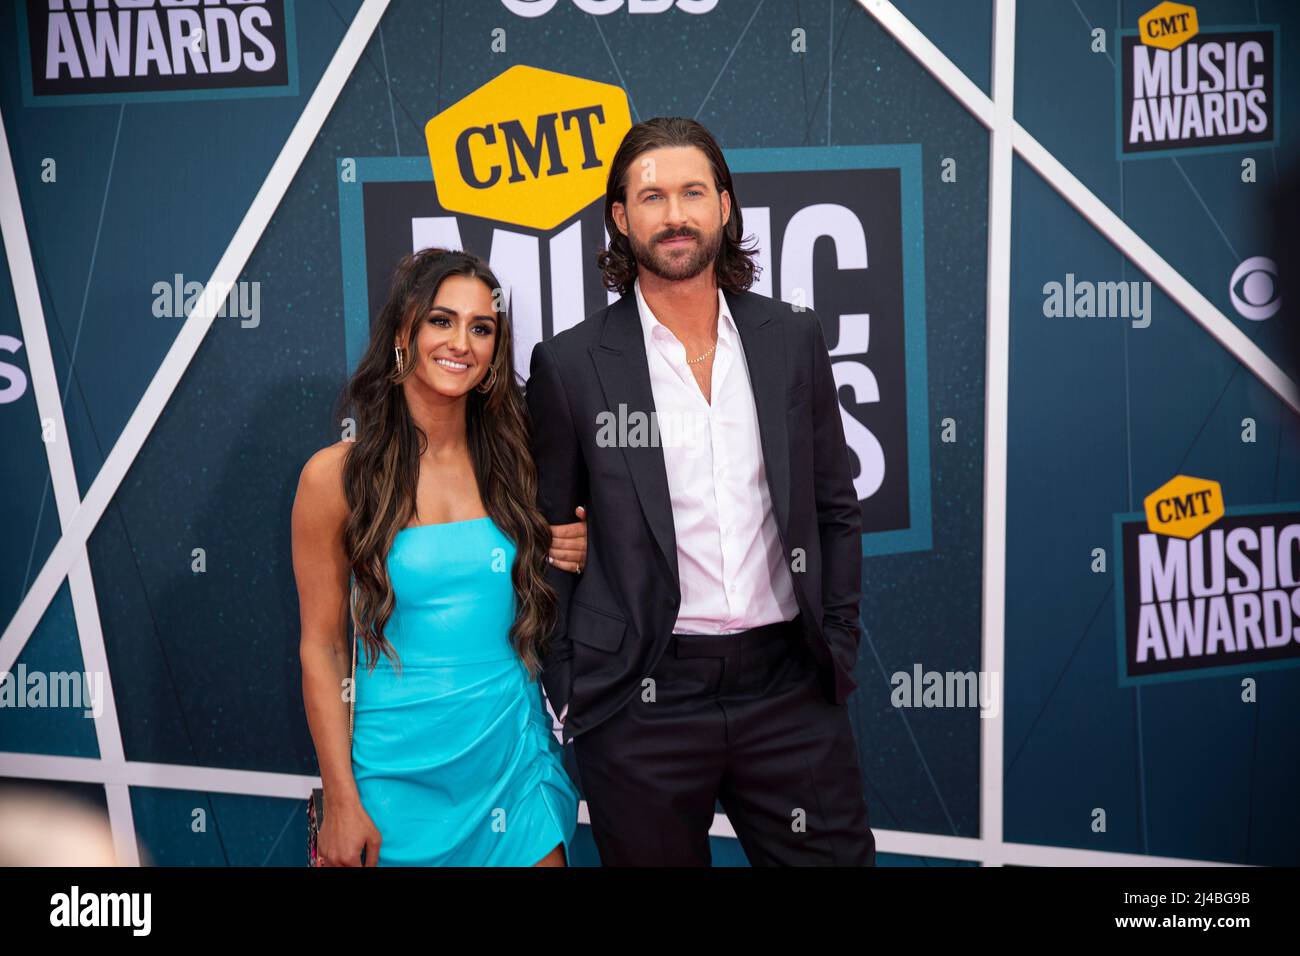 Nashville, Tenn. - April 11, 2022 Sophia Sansone and Riley Green arrives at the red carpet for the 2022 CMT Awards on April 11, 2022 at Municipal Auditorium in Nashville, Tenn. Credit: Jamie Gilliam/The Photo Access Stock Photo